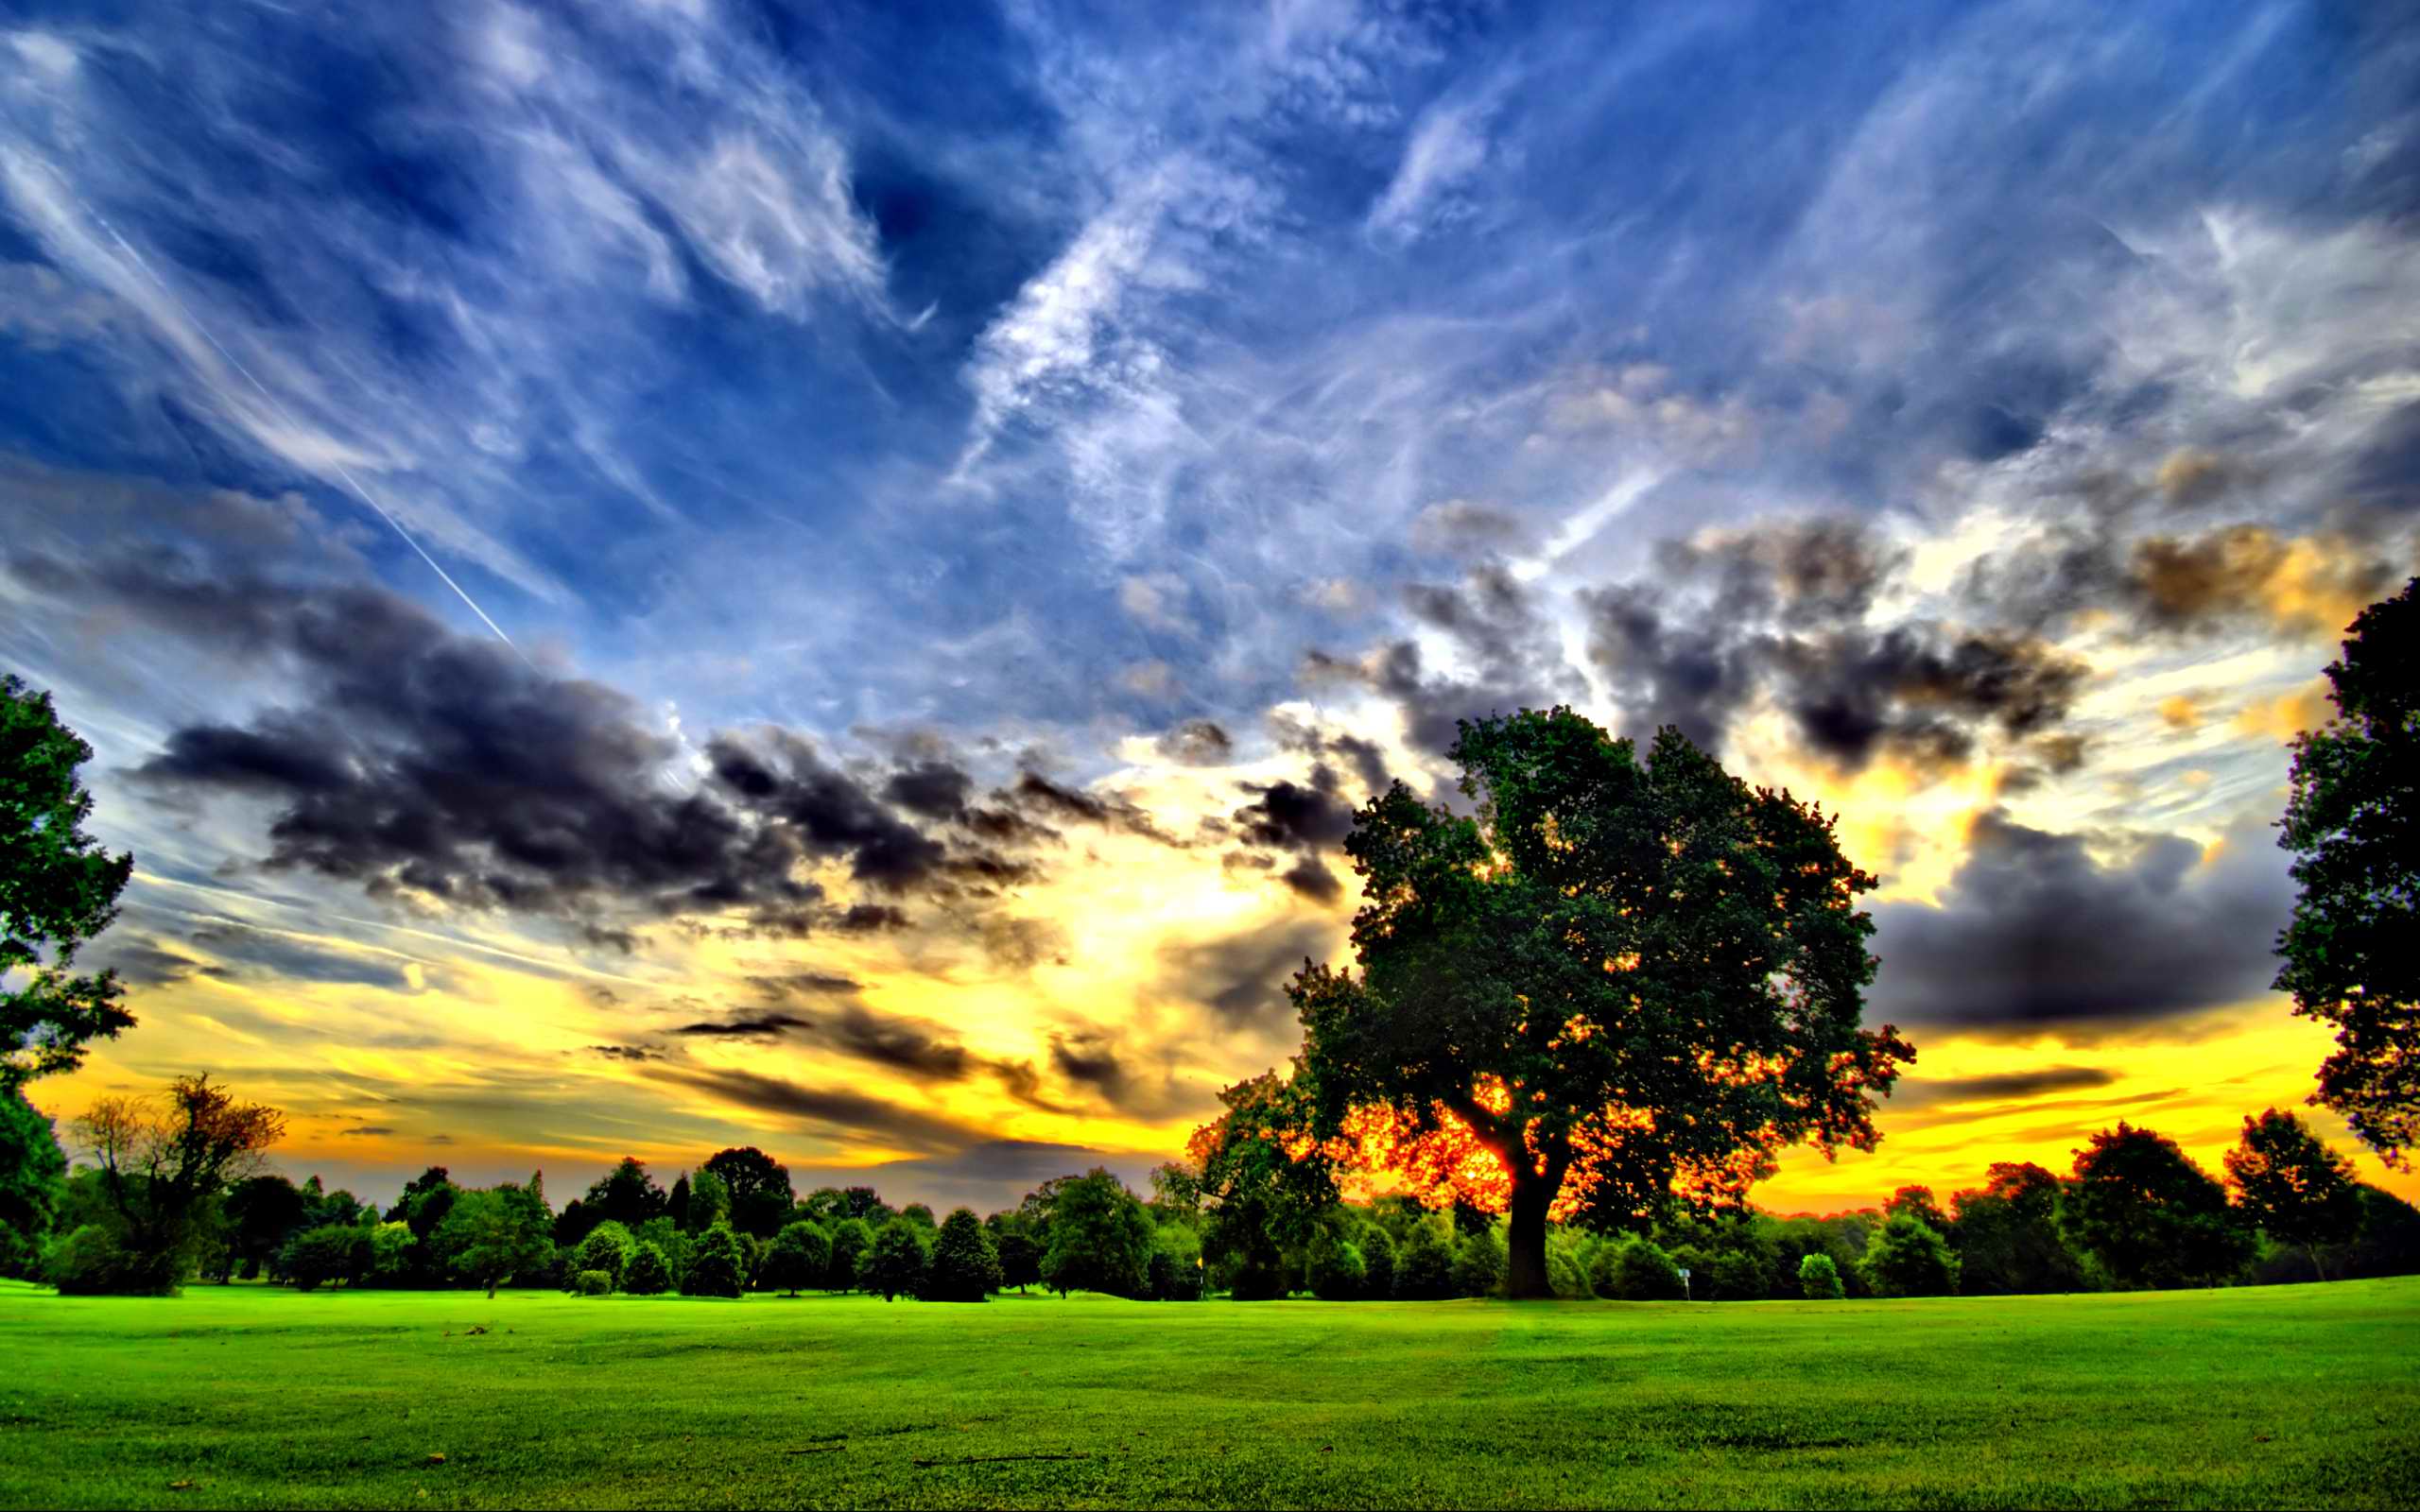 Sky Wallpaper Nature For Facebook Cover Page Desktop HD Image Of